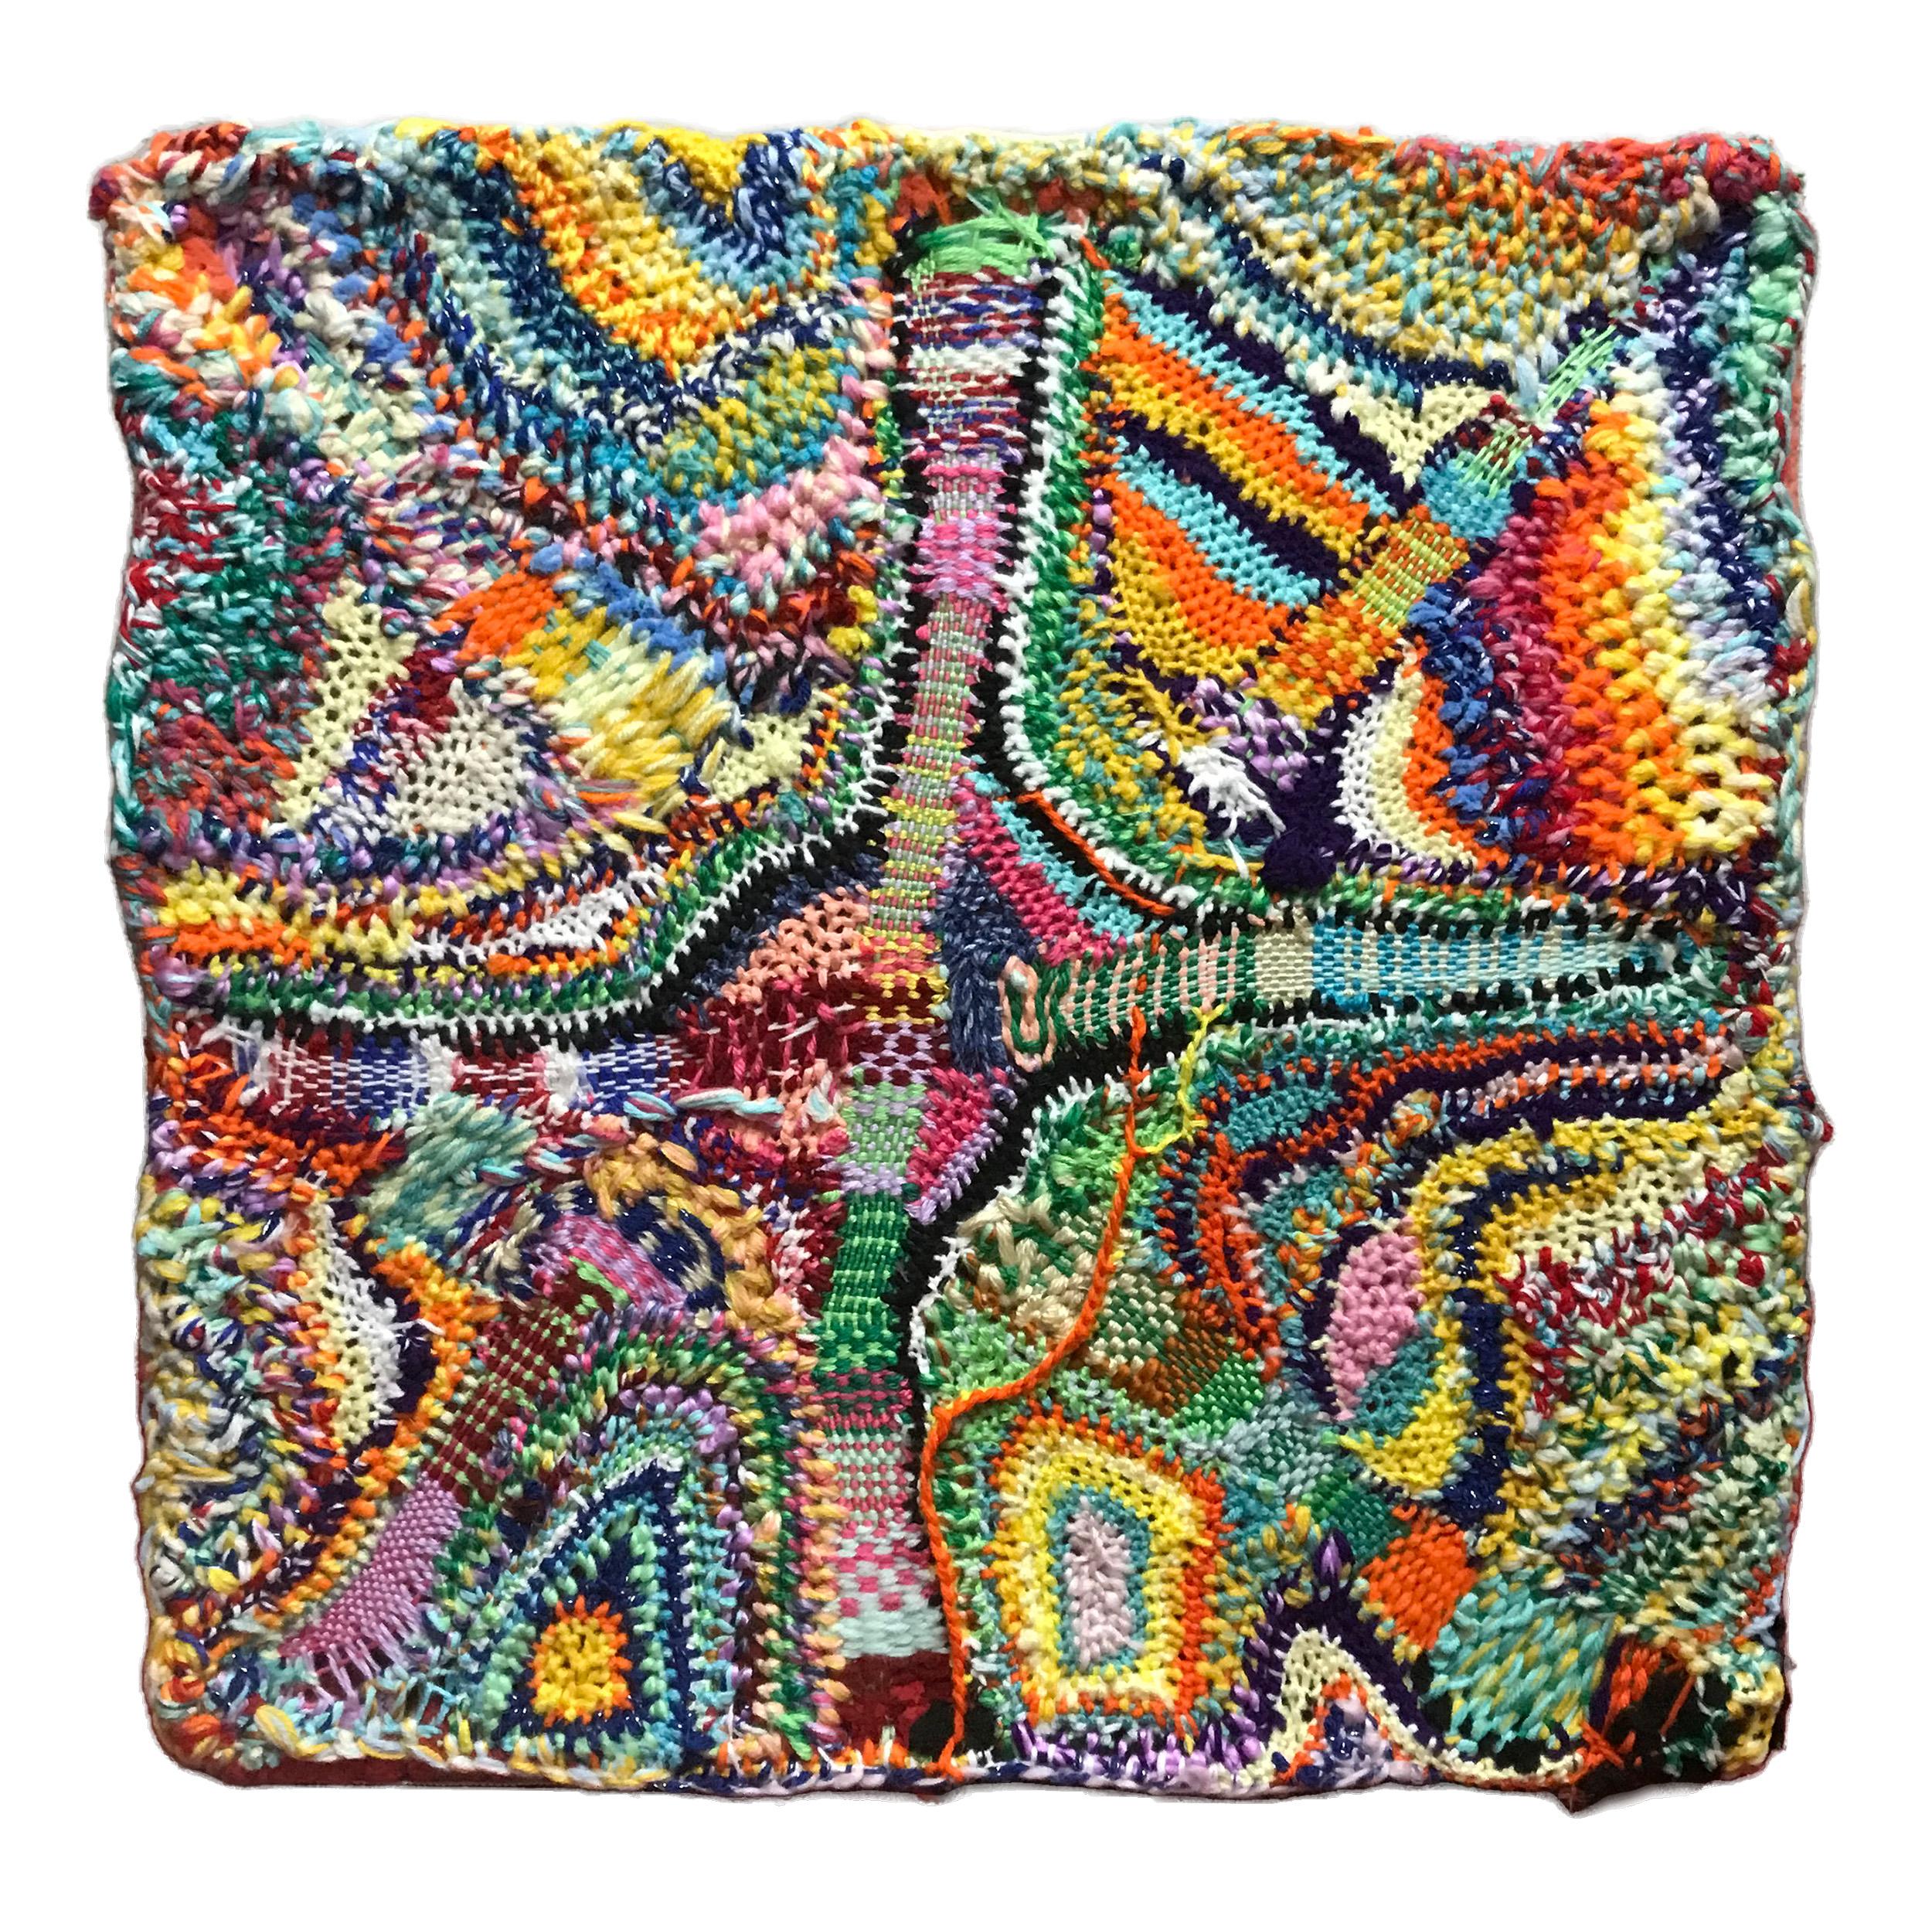 Abstract Sculpture Ethan Meyer - "Glossolalia", Contemporary, Woven, Fiber, Wall Hanging, Stretched, Abstract